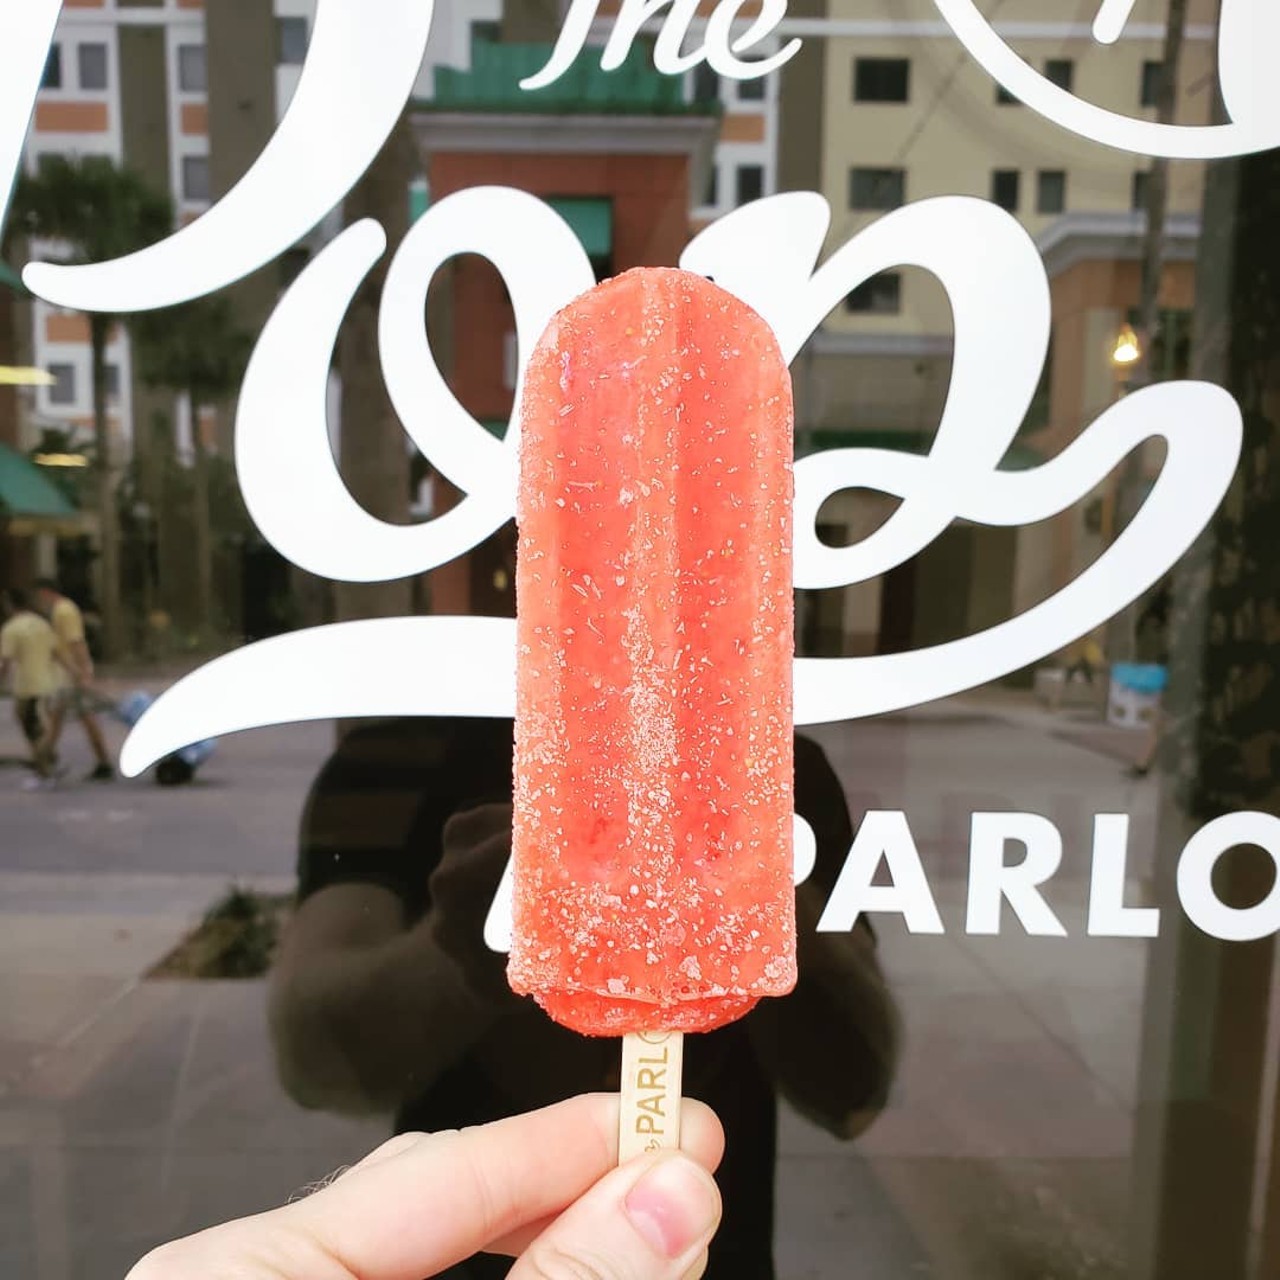 The Pop Parlour
431 E. Central Blvd., also 4214 E. Plaza Drive on the UCF campus  
The Pop Parlour strives to make popsicles from the freshest ingredients &#150; they even grow their own herbs and peppers. They flash-freeze their pops for 12 minutes, making them a lot more flavorful and a lot less icy. The Pop Parlour has a ton of fruit-based and cream-based flavors, but one of their cooler options is boozy pops. Try the Cookie Butter Bourbon, Jai Alai Peach with a Cigar City IPA or Watermelon Mojito. 
Photo via The Pop Parlour/Facebook